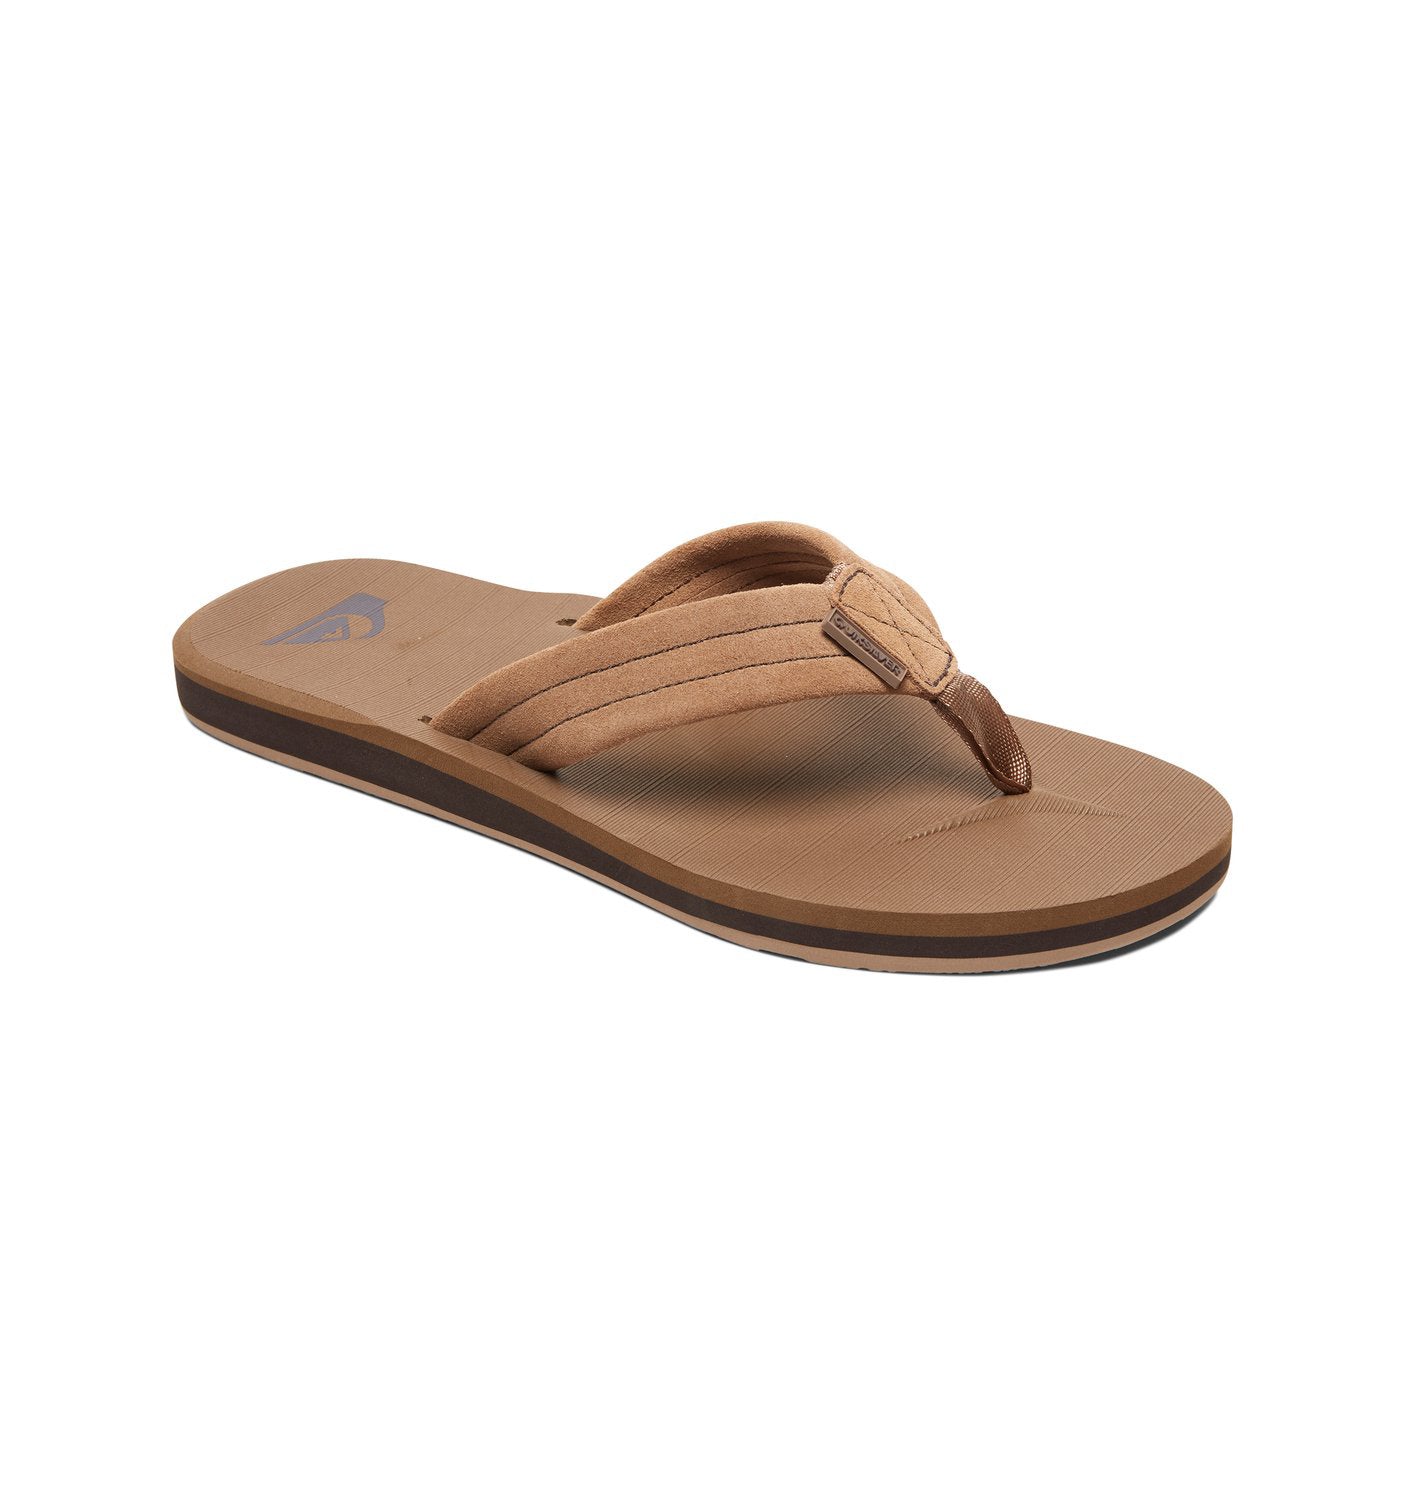 Quiksilver Carver Suede Youth Sandal TKD0-Tan 5 Y